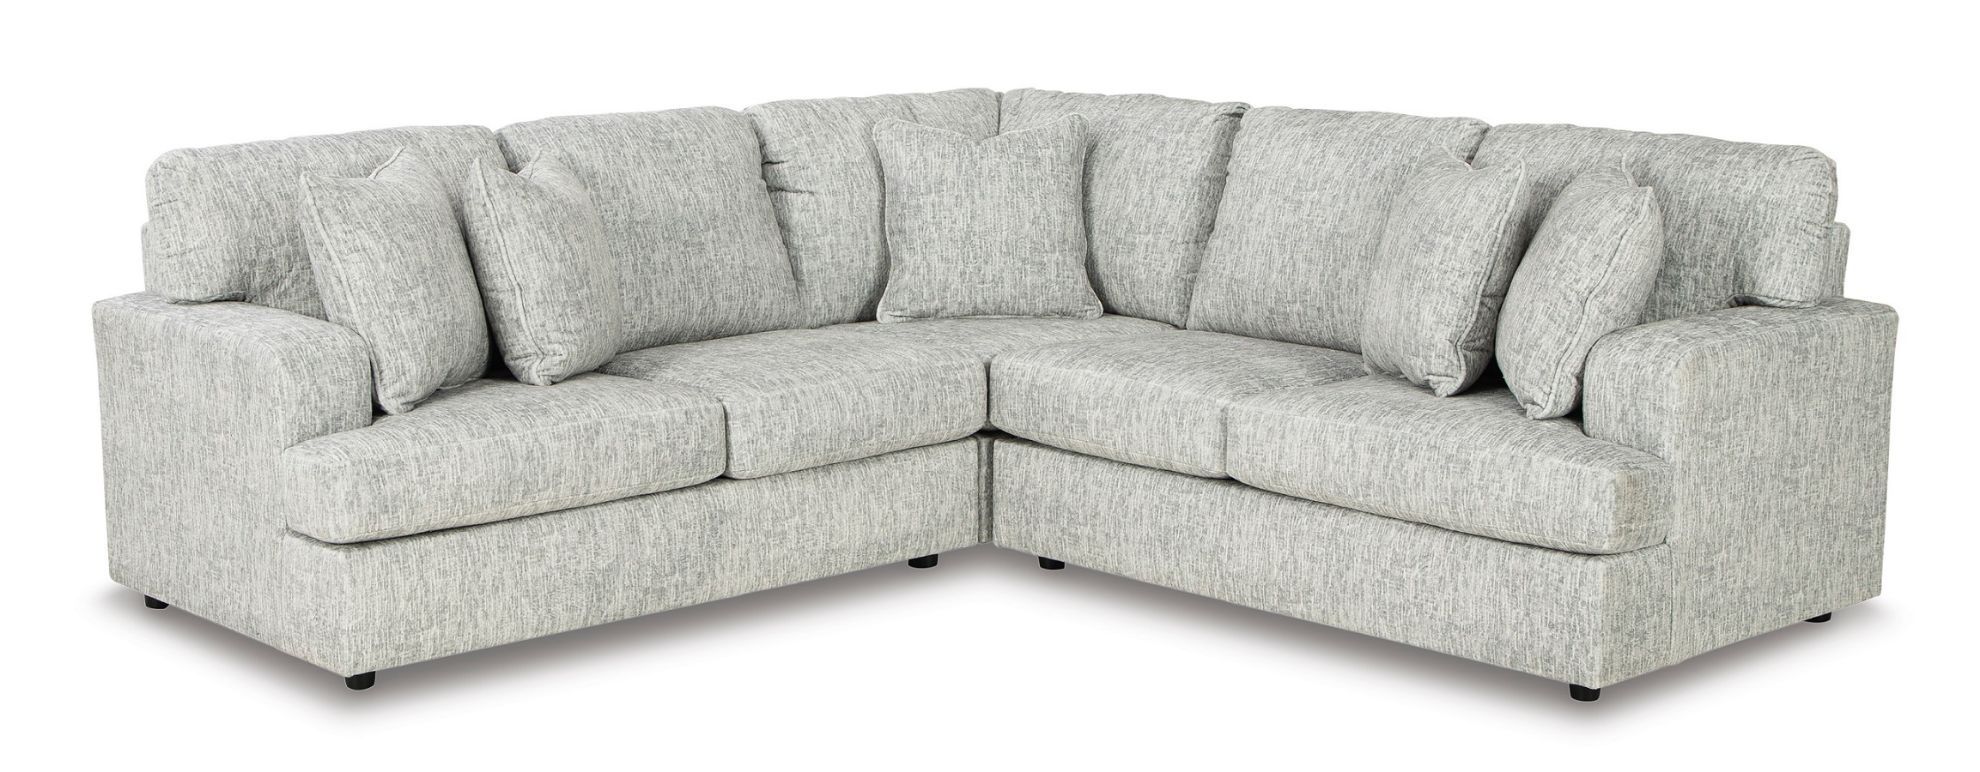 Playwrite 3pc Sectional